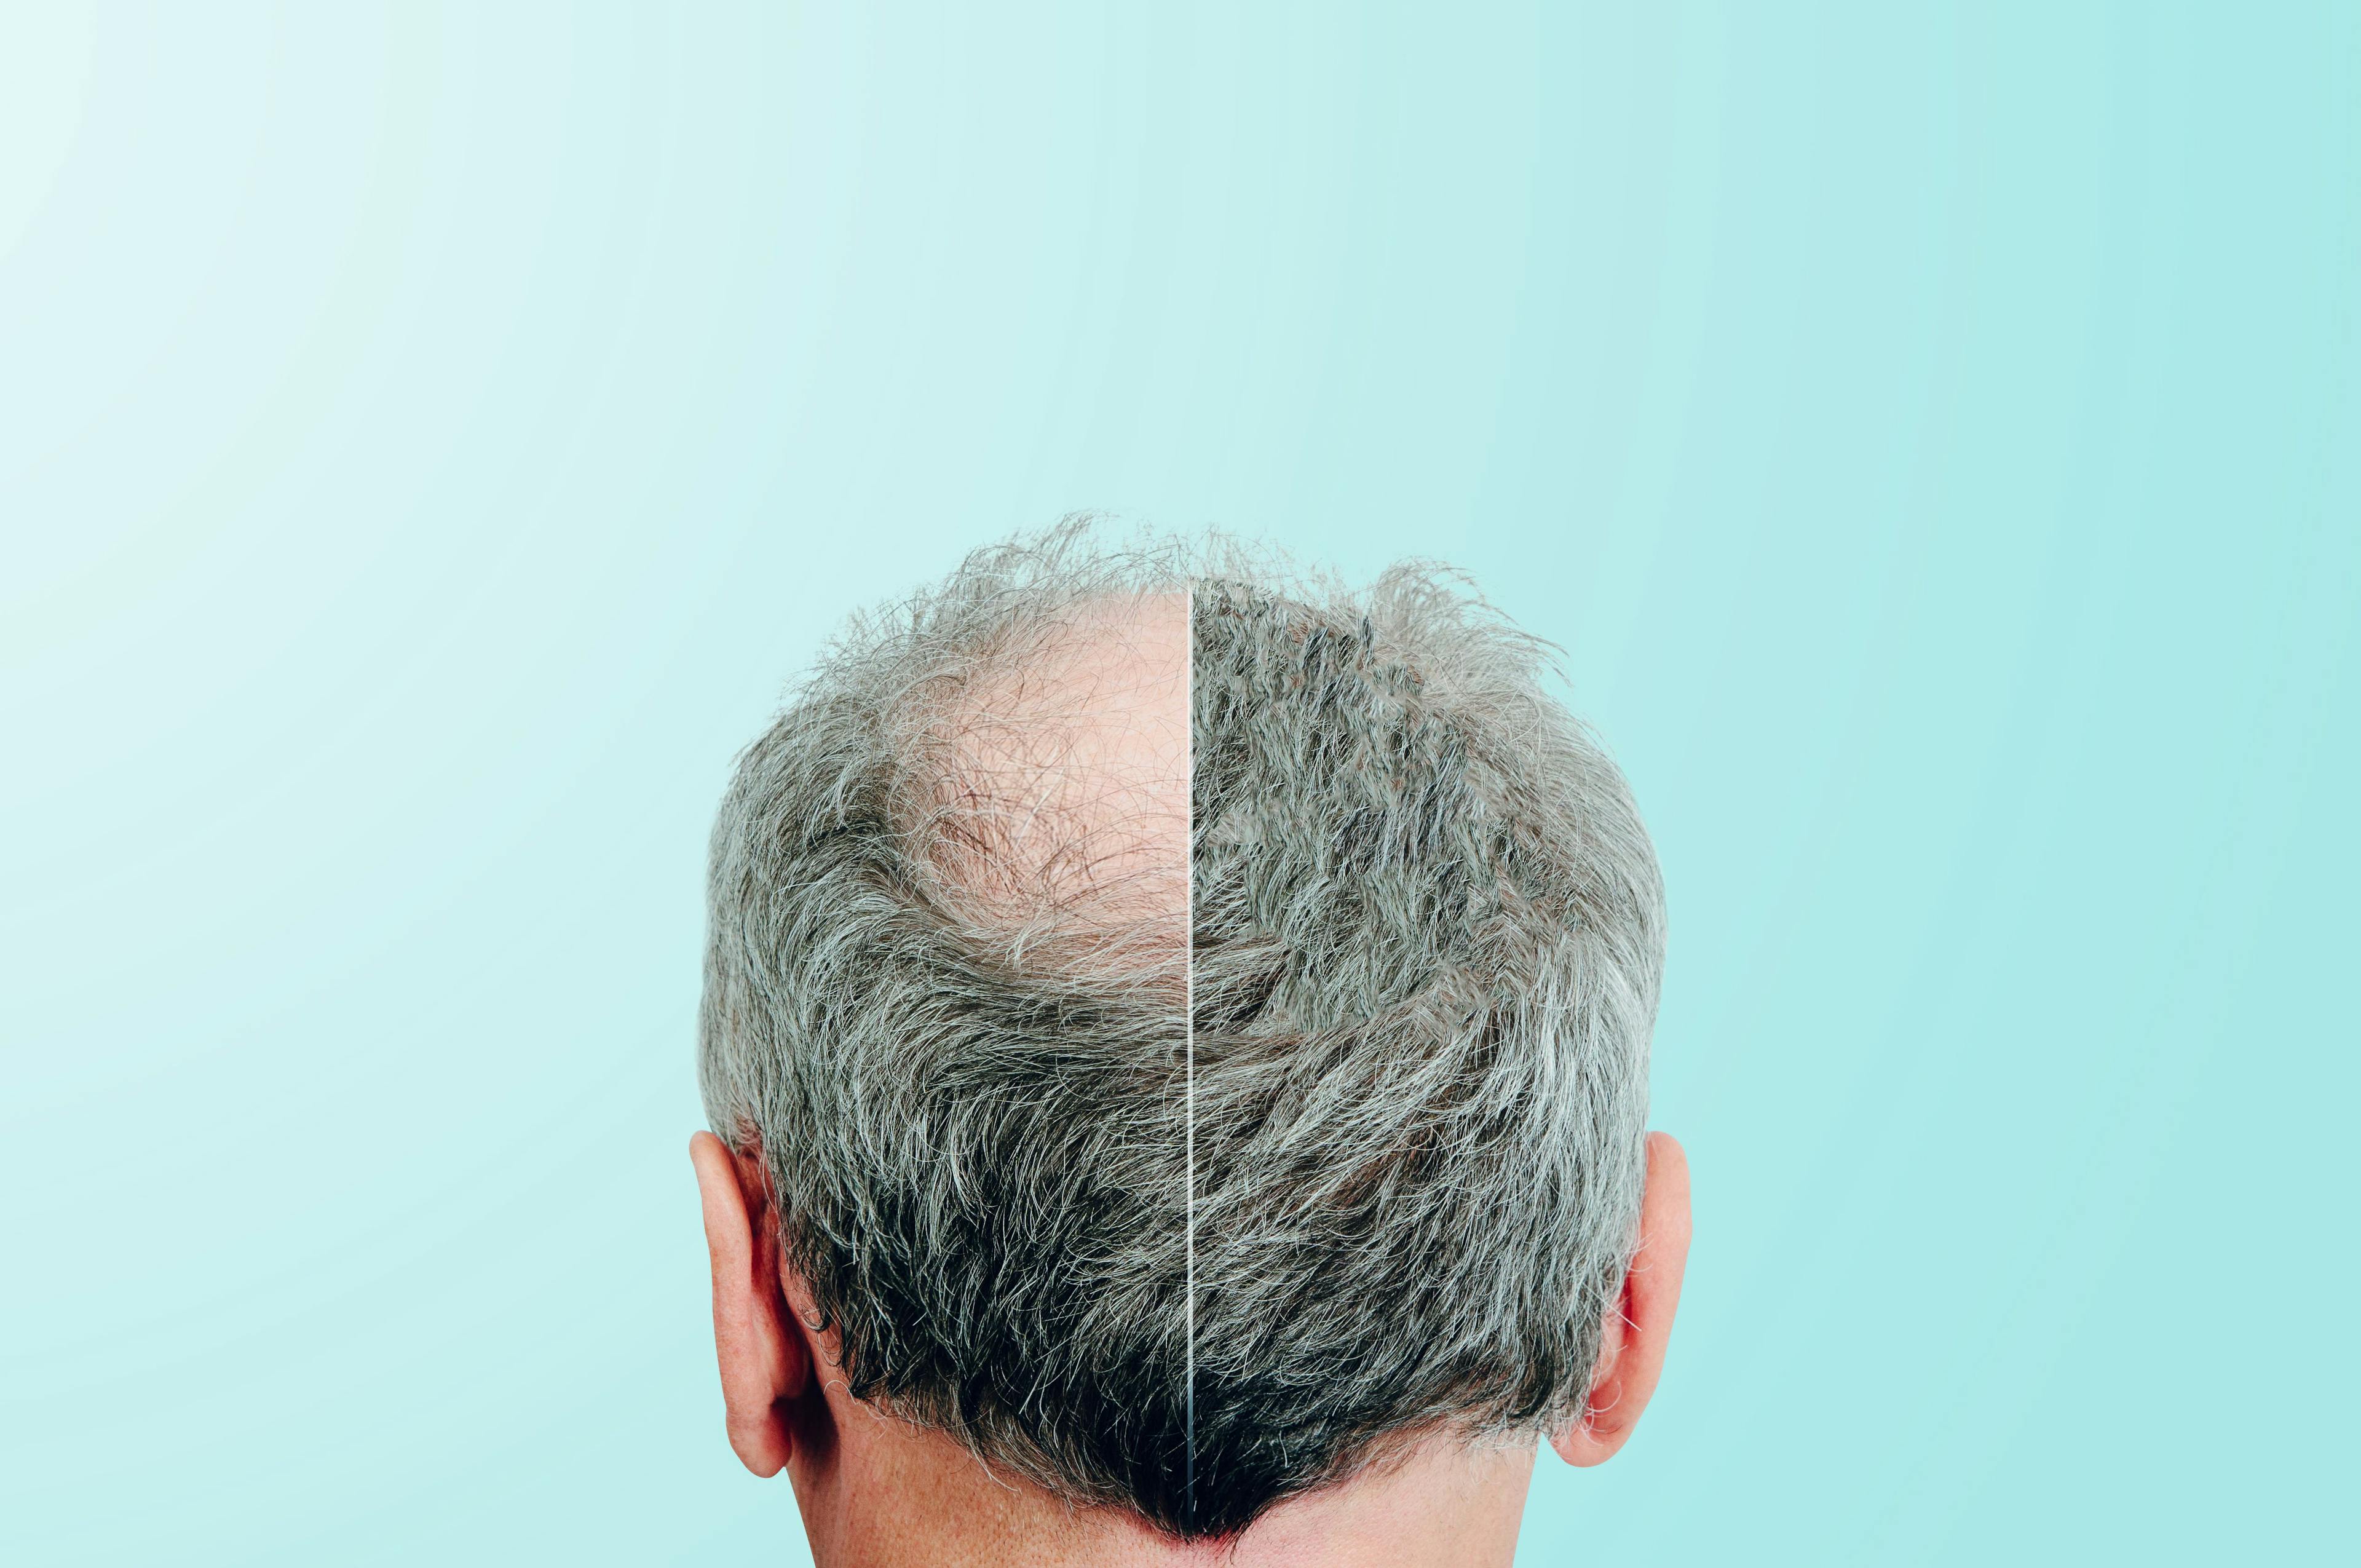 Before and after hair regrowth, rear view of male head | Image Credit: Sebastian - stock.adobe.com